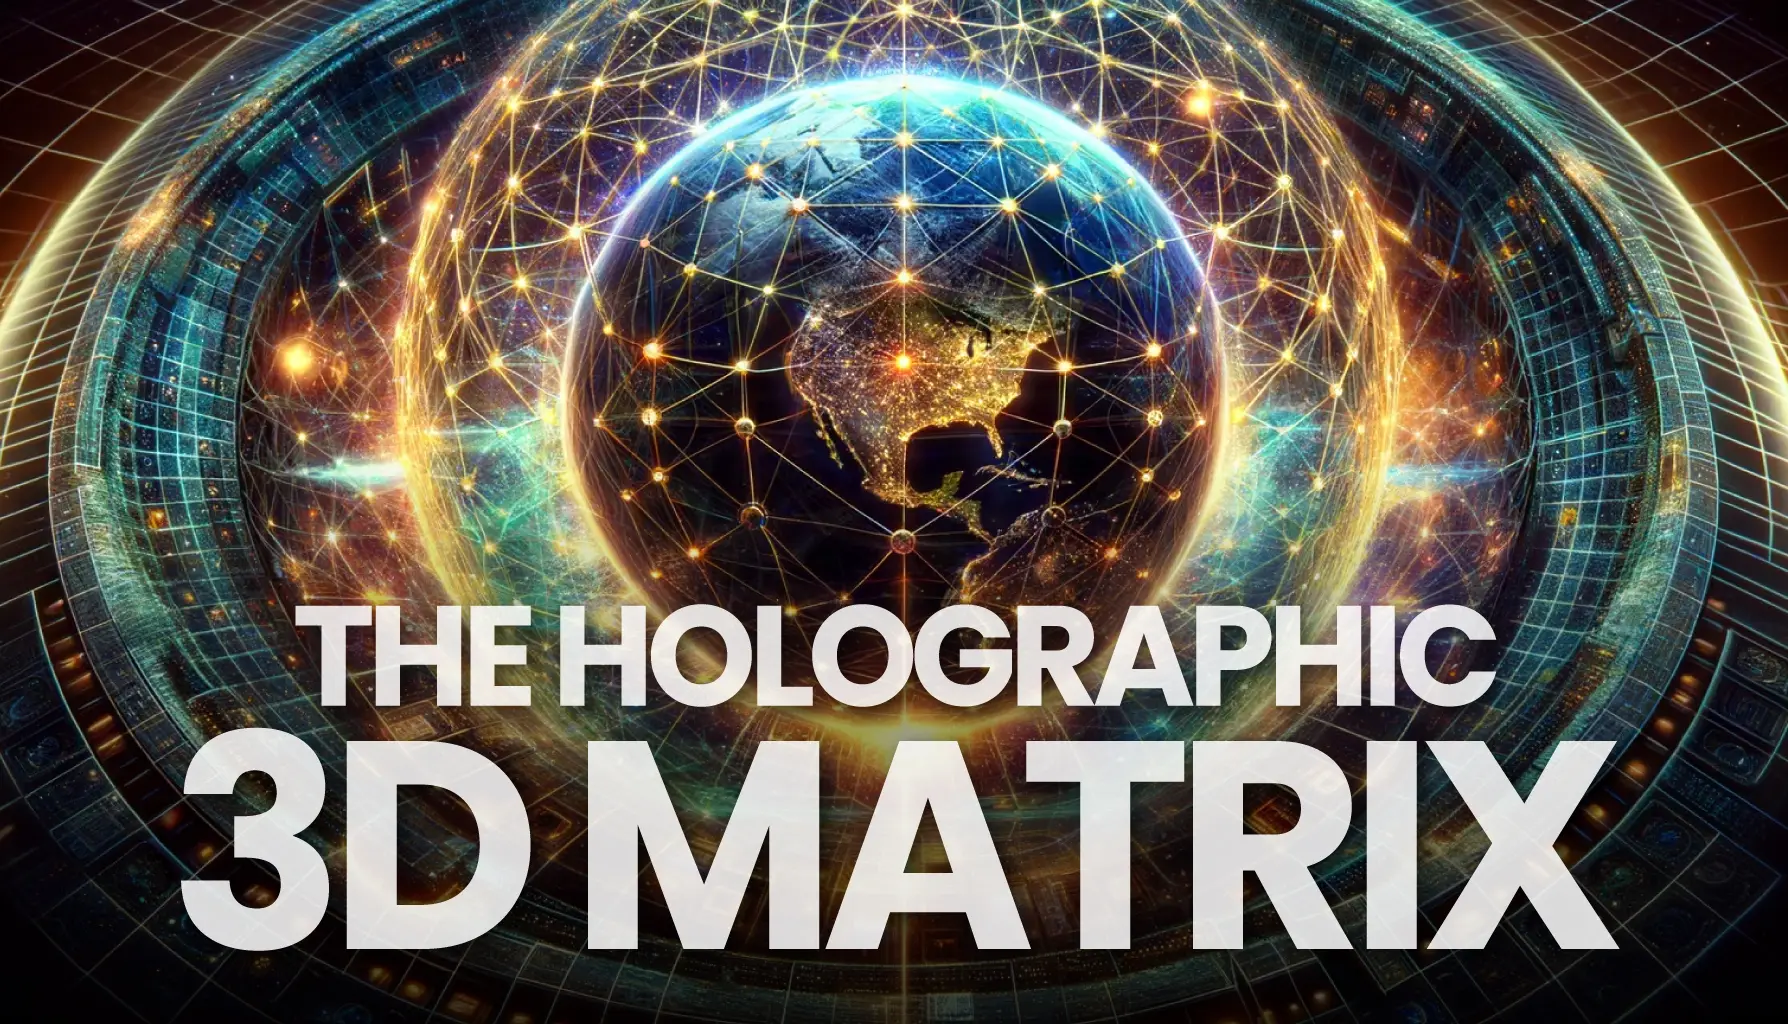 The 3D MATRIX on Earth is a HOLOGRAPHIC Projection!